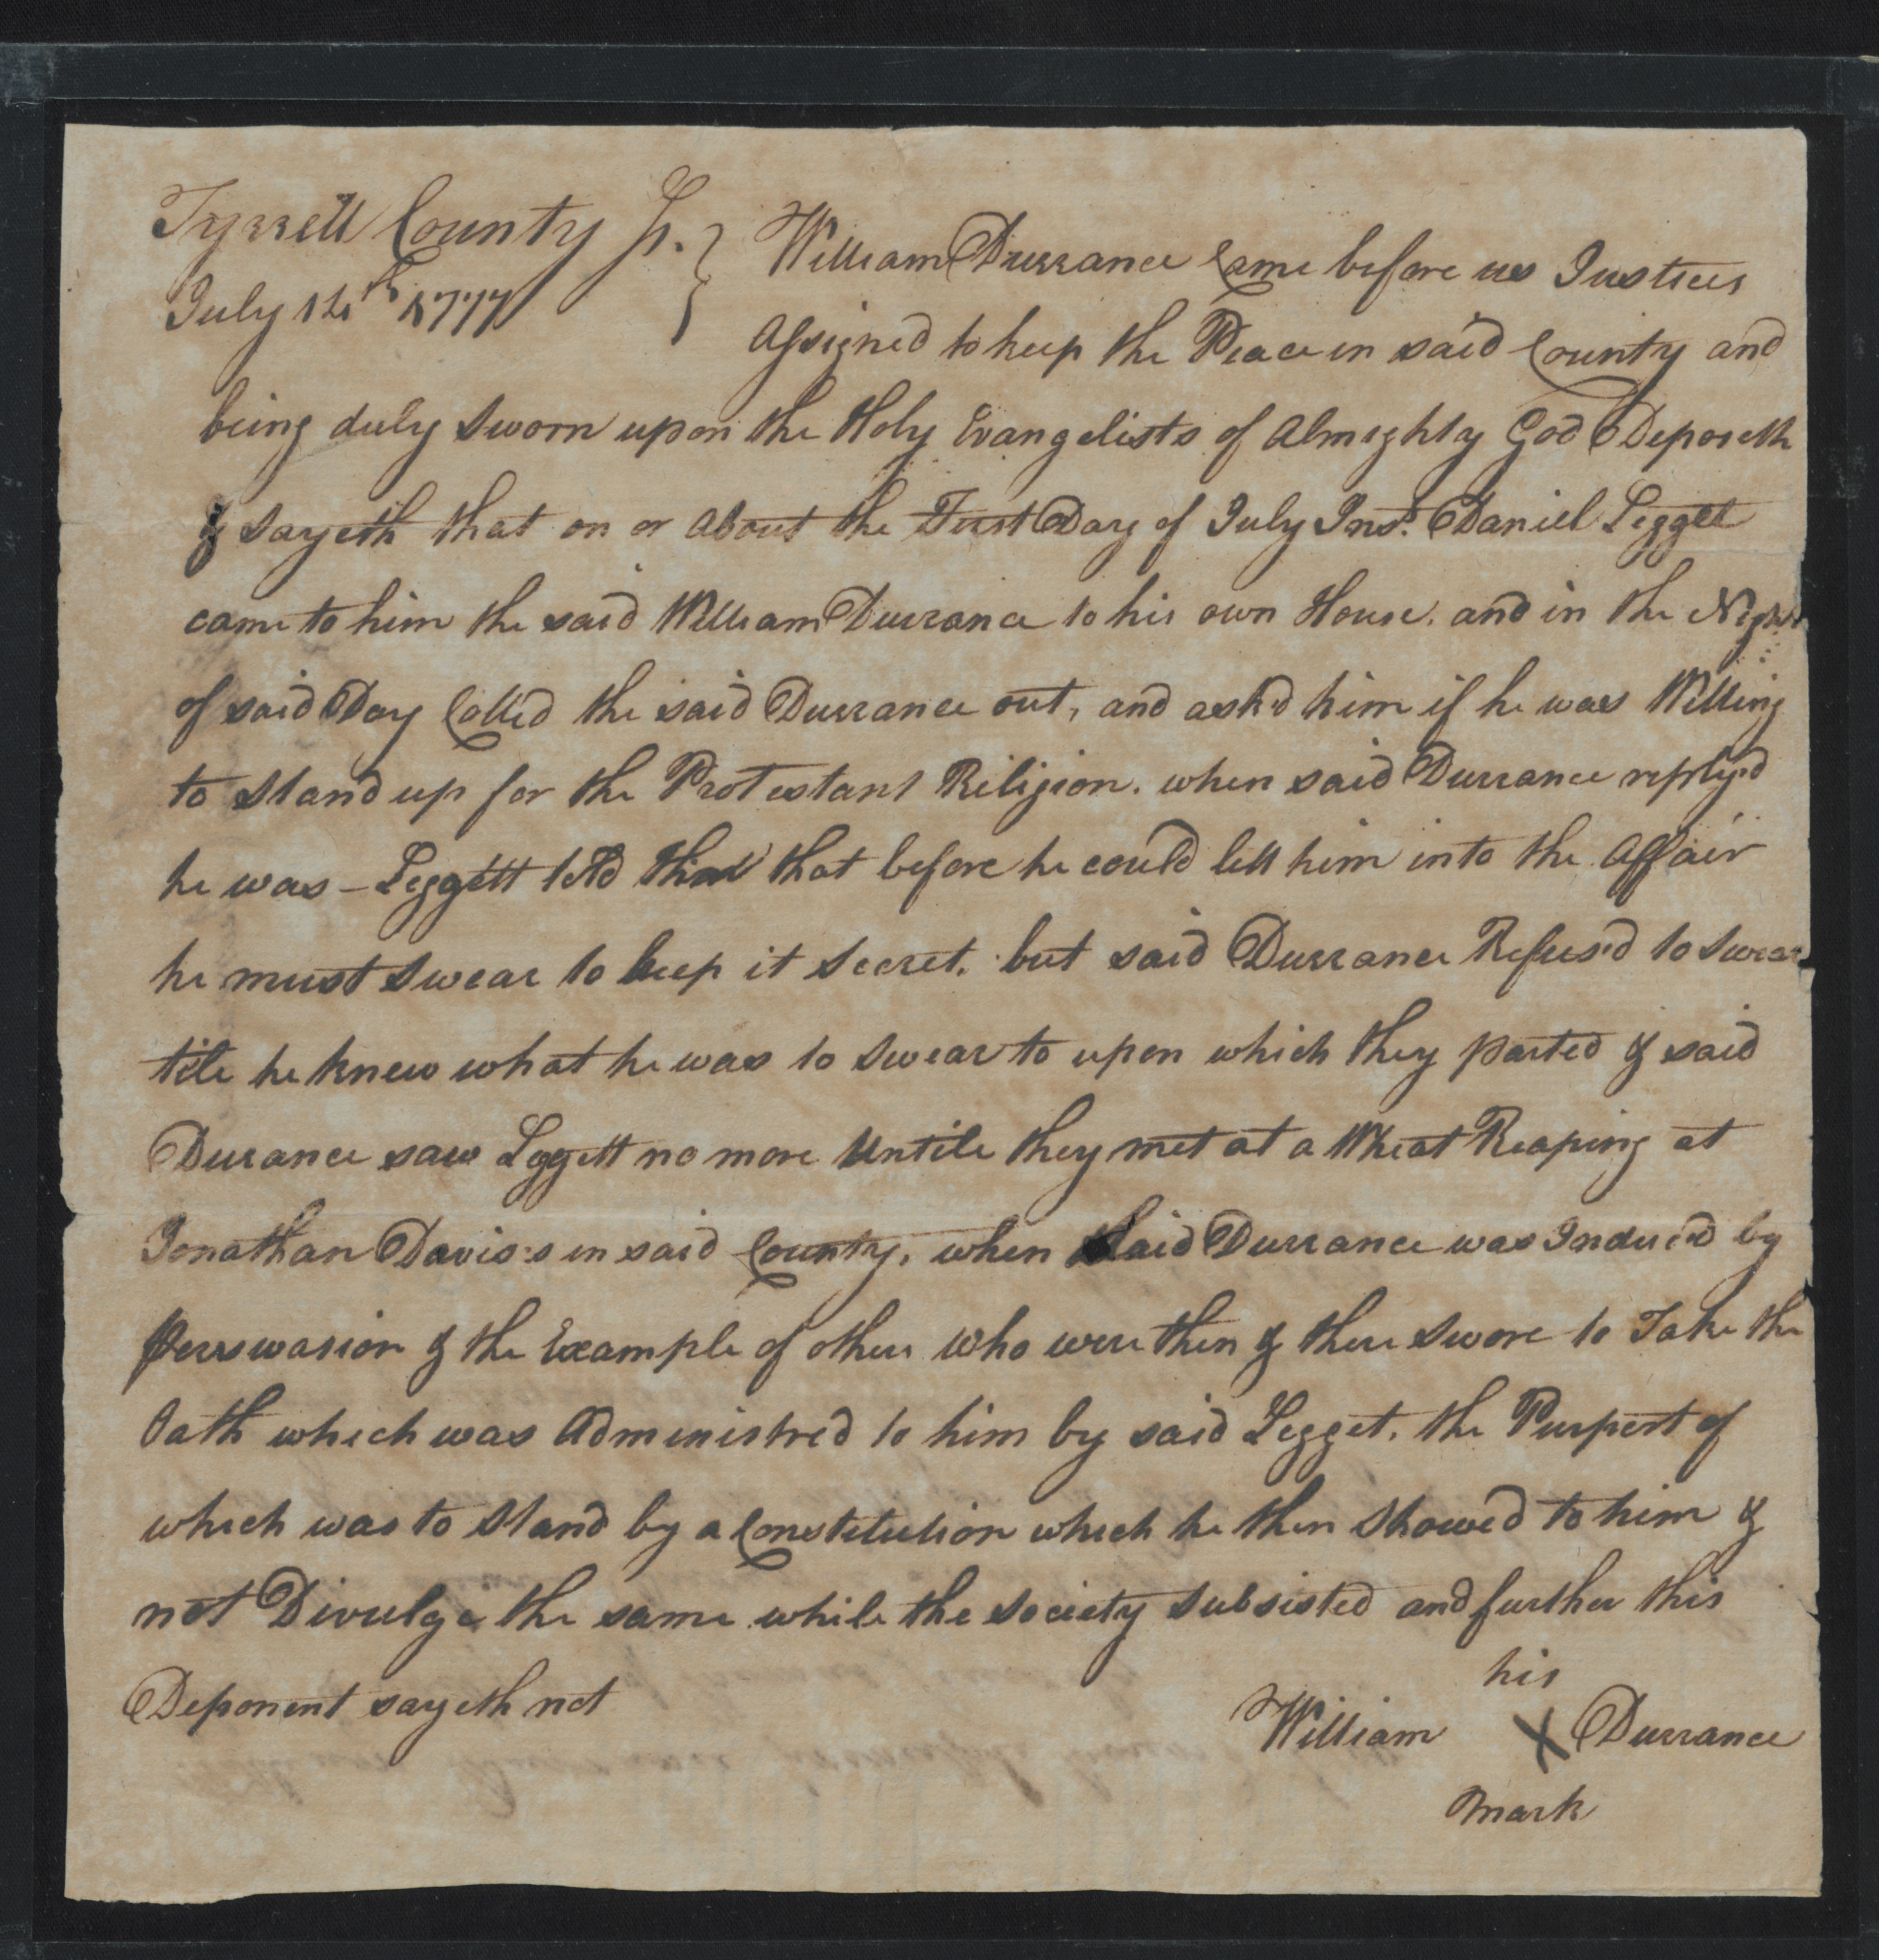 Deposition of William Durrance, 14 July 1777, page 1